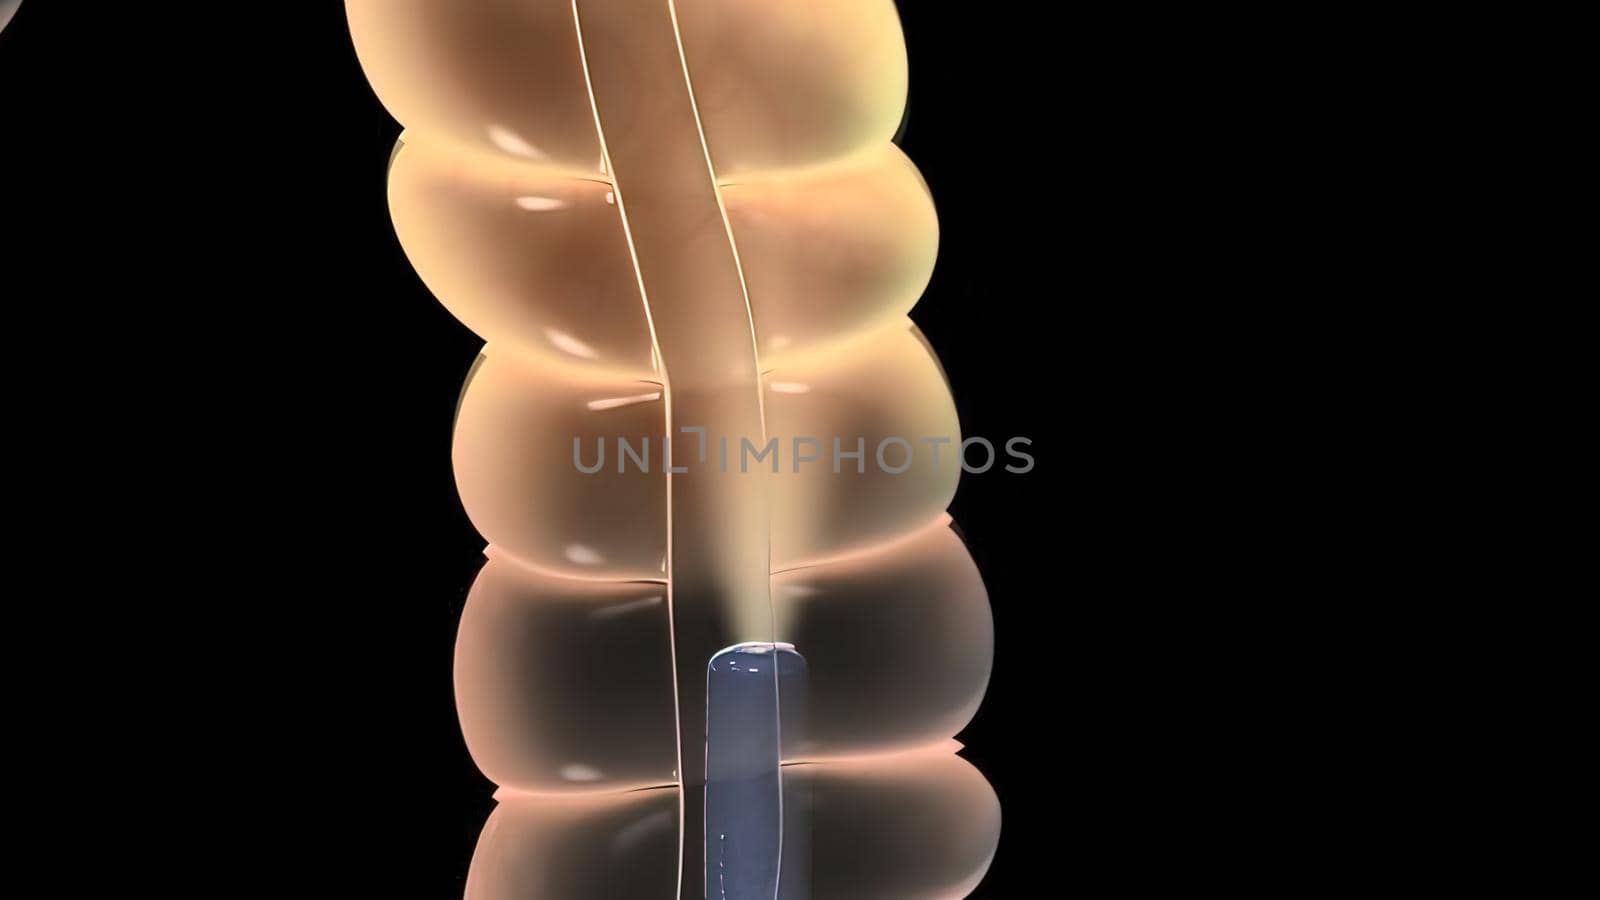 Colonoscopy Biopsy Of The Gastrointestinal Tract In Patients by creativepic